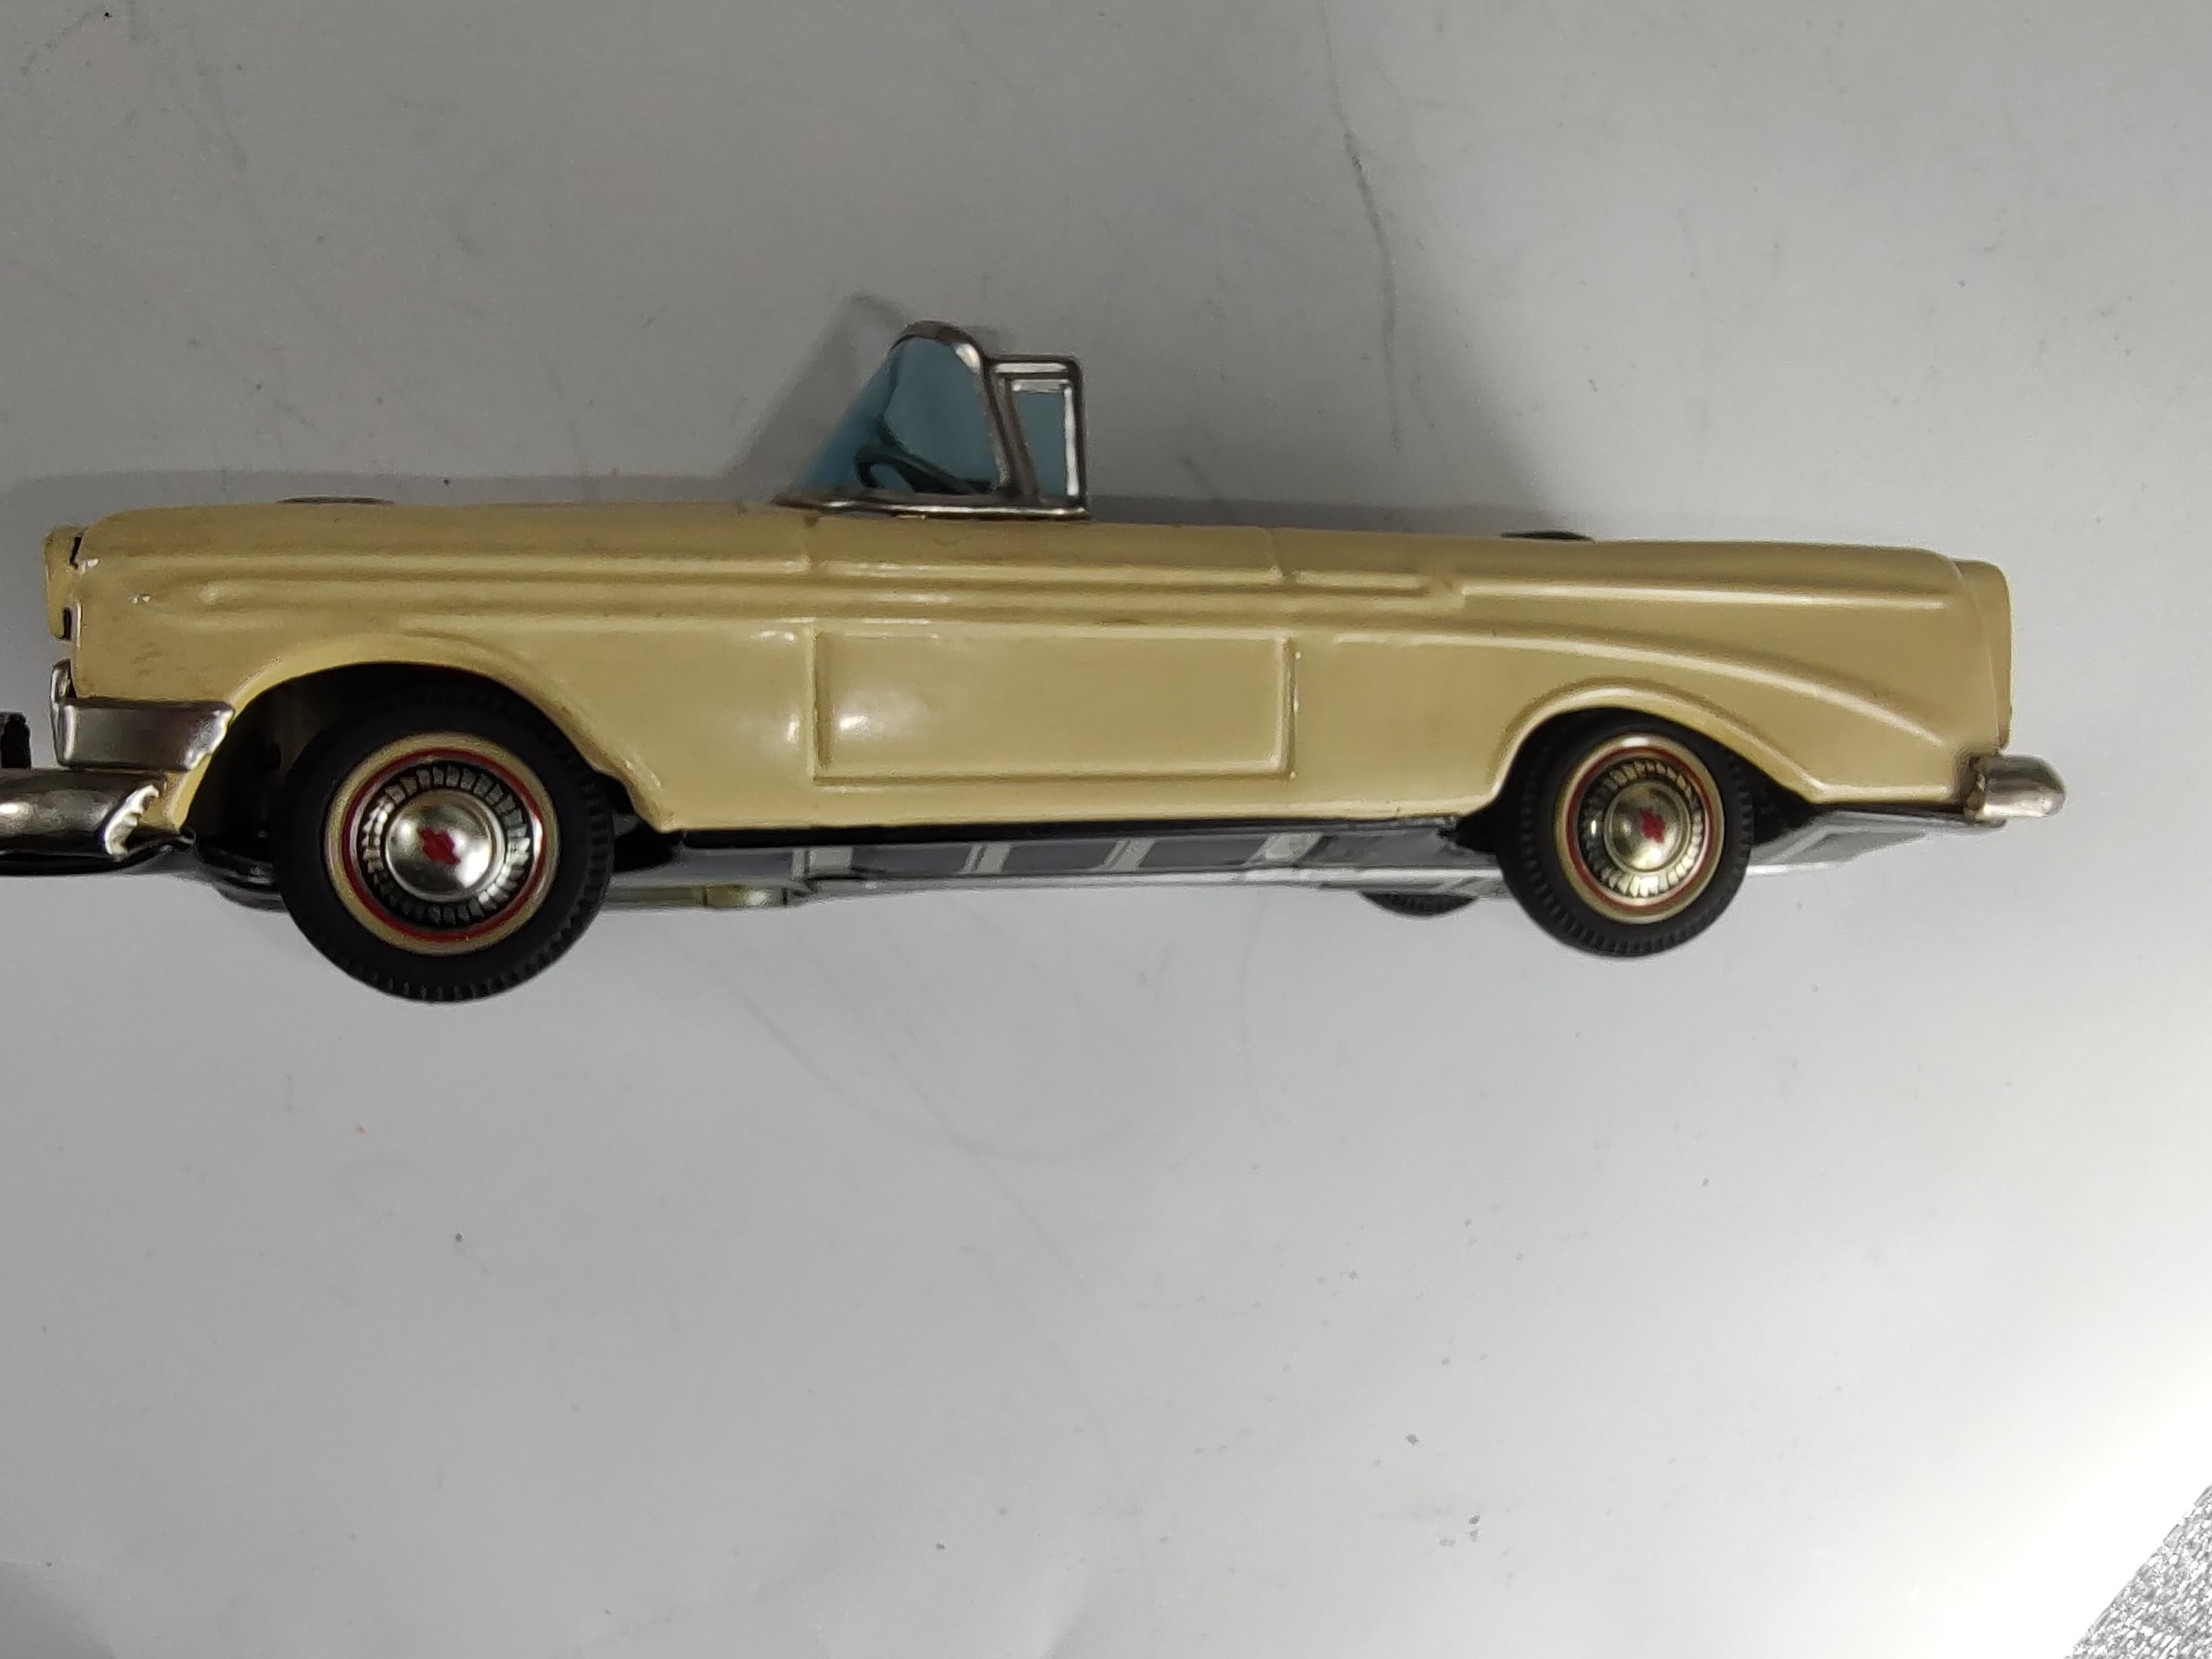 Painted Midcentury Tin Litho Toy Car by Bandai Japan Chevy Convertible C1957